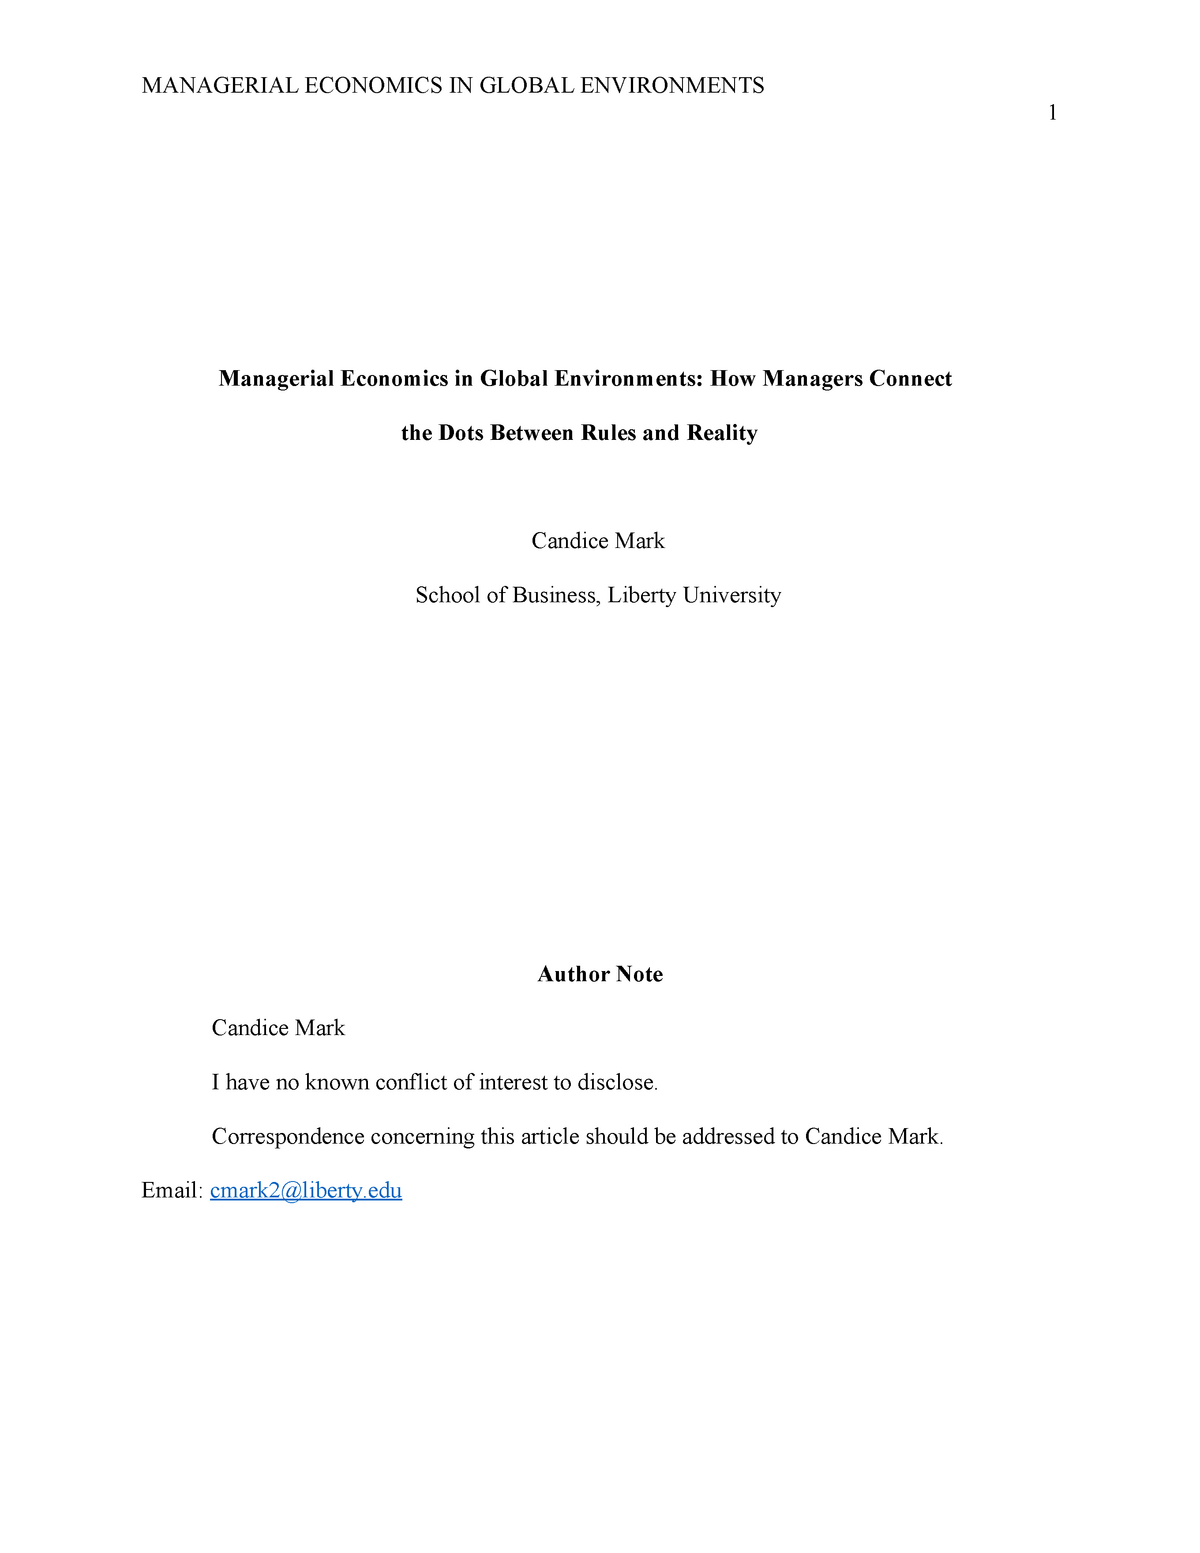 research paper on managerial economics